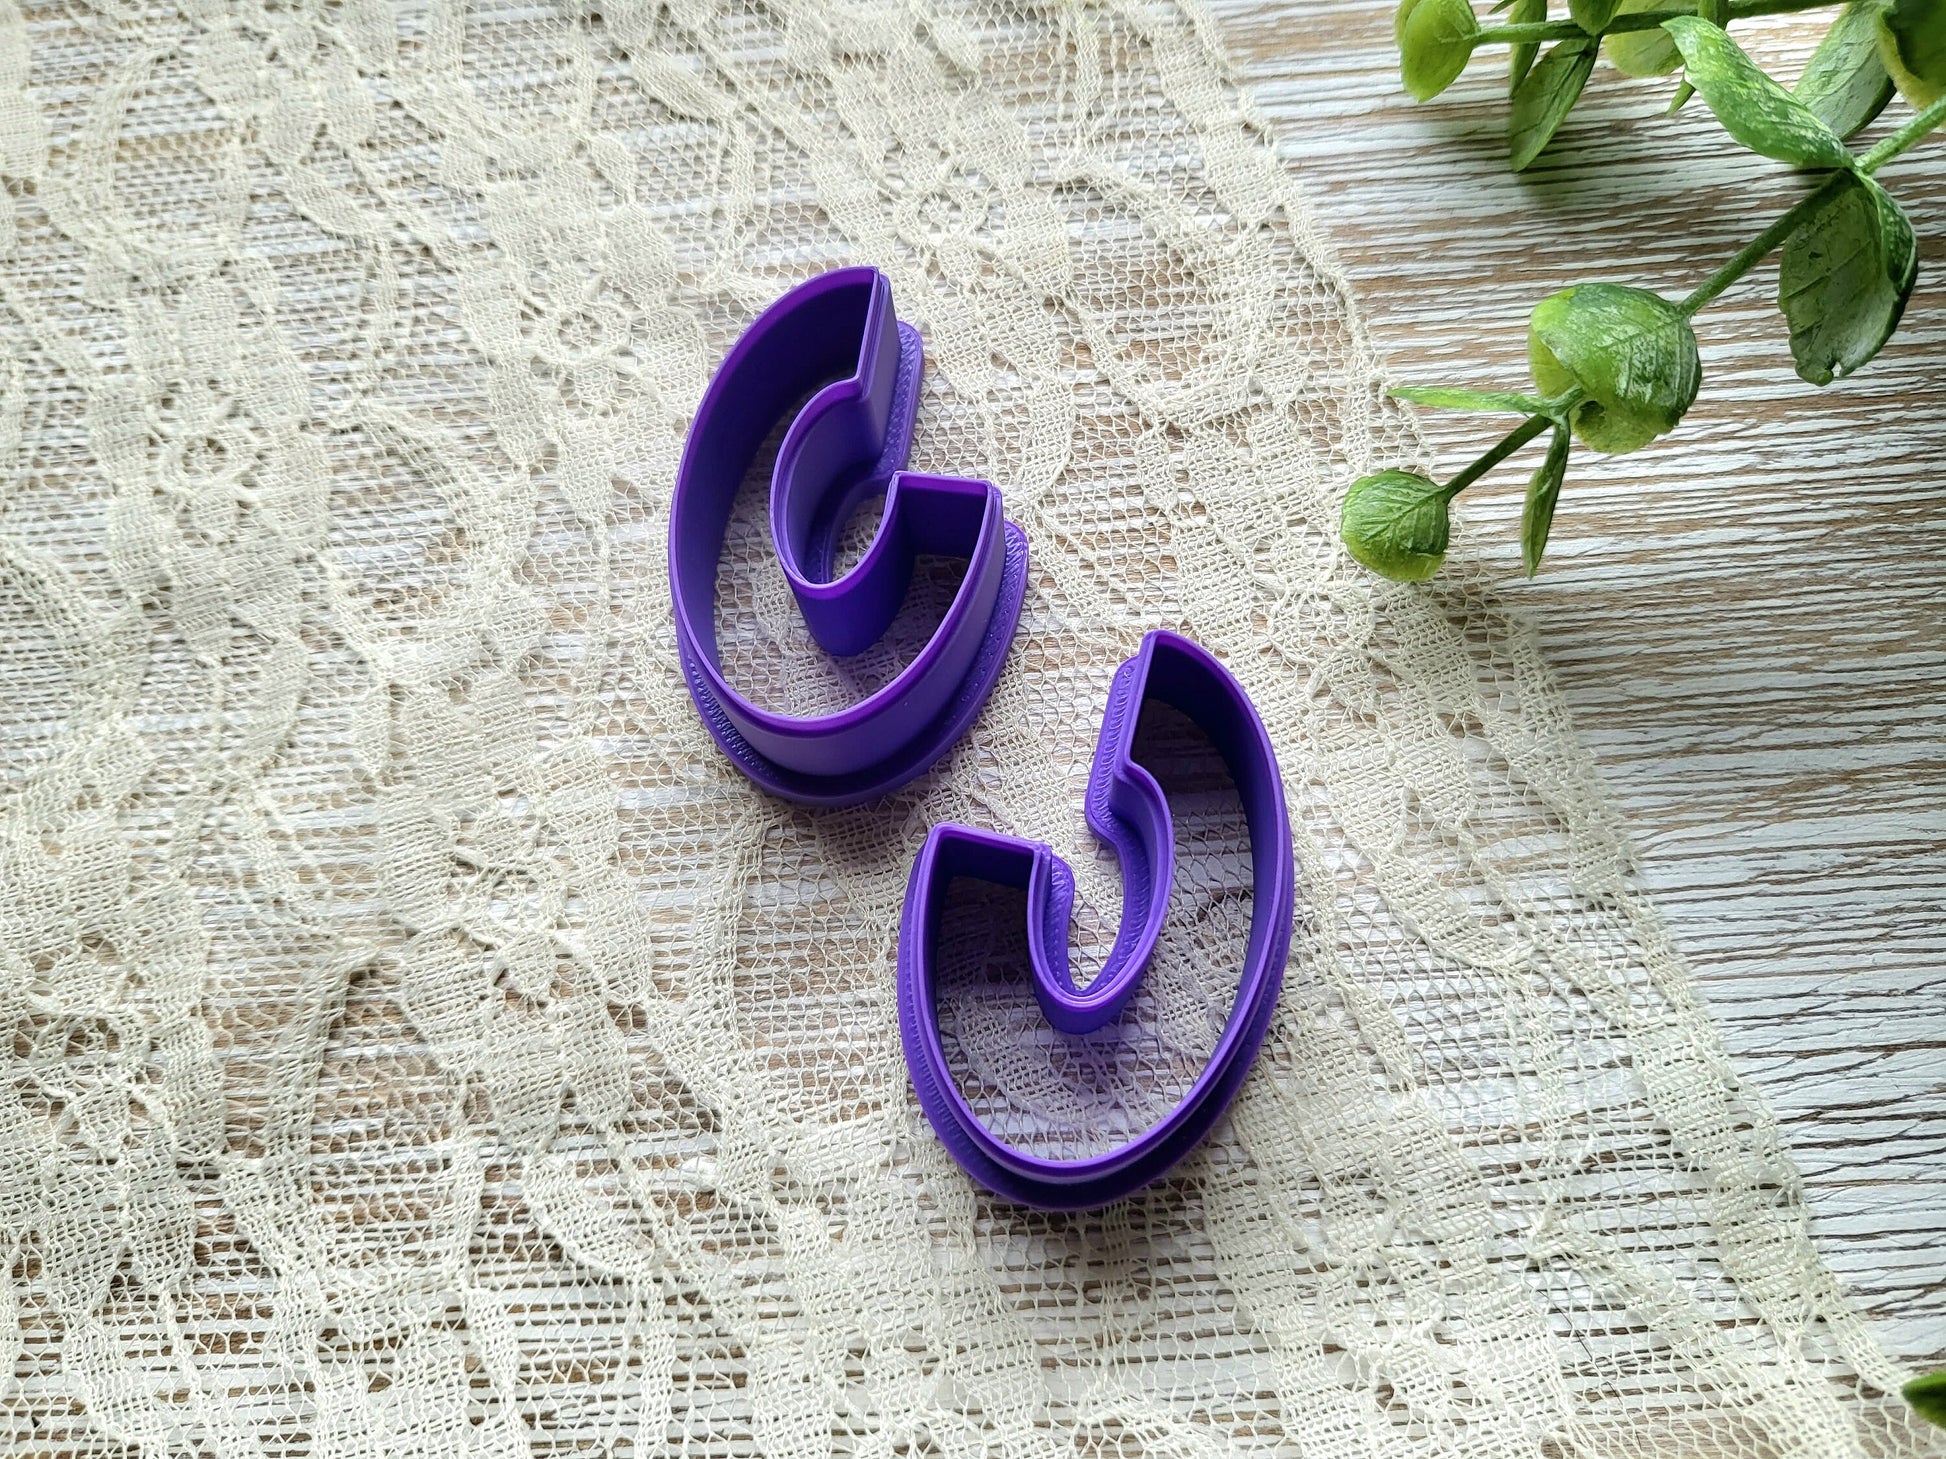 Oval Hoop Clay Cutter, Polymer Clay Cutters, Earring Jewelry Making, Hoop Making Clay Cutter, Hoop Clay Cutter